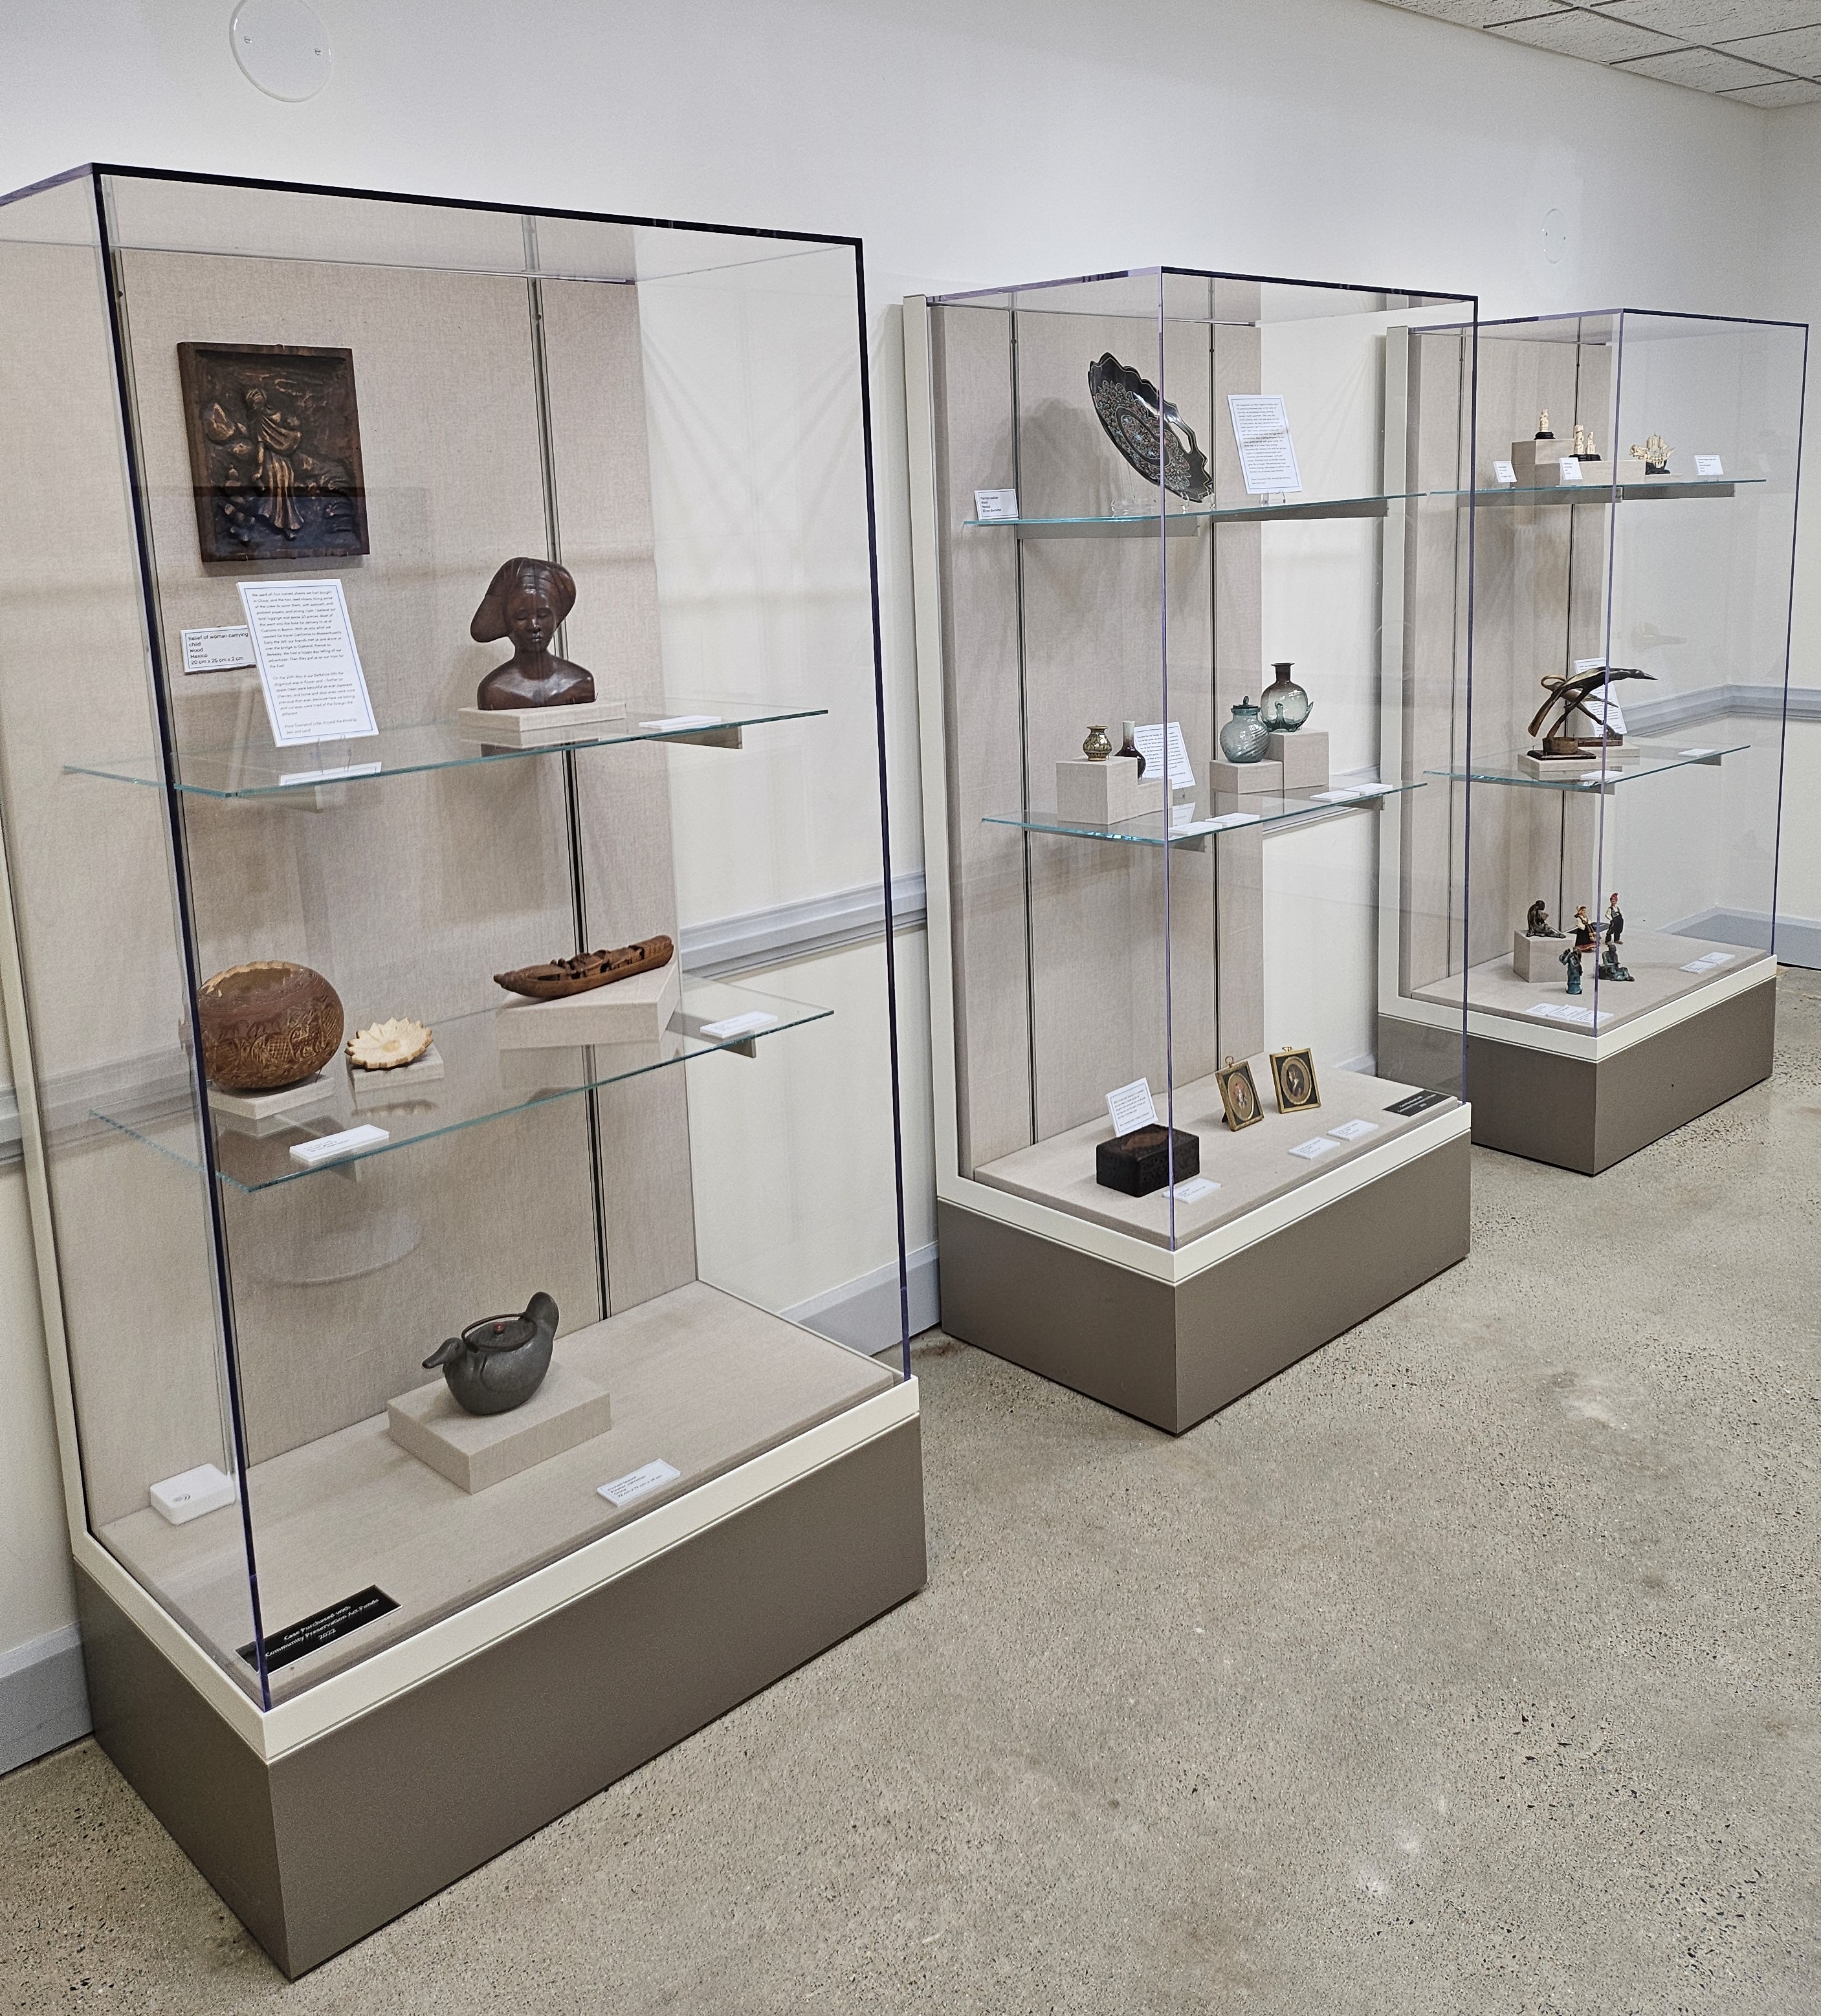 Three museum cases displaying glassware, ivory sculptures, woodcuts, and other travel mementos.